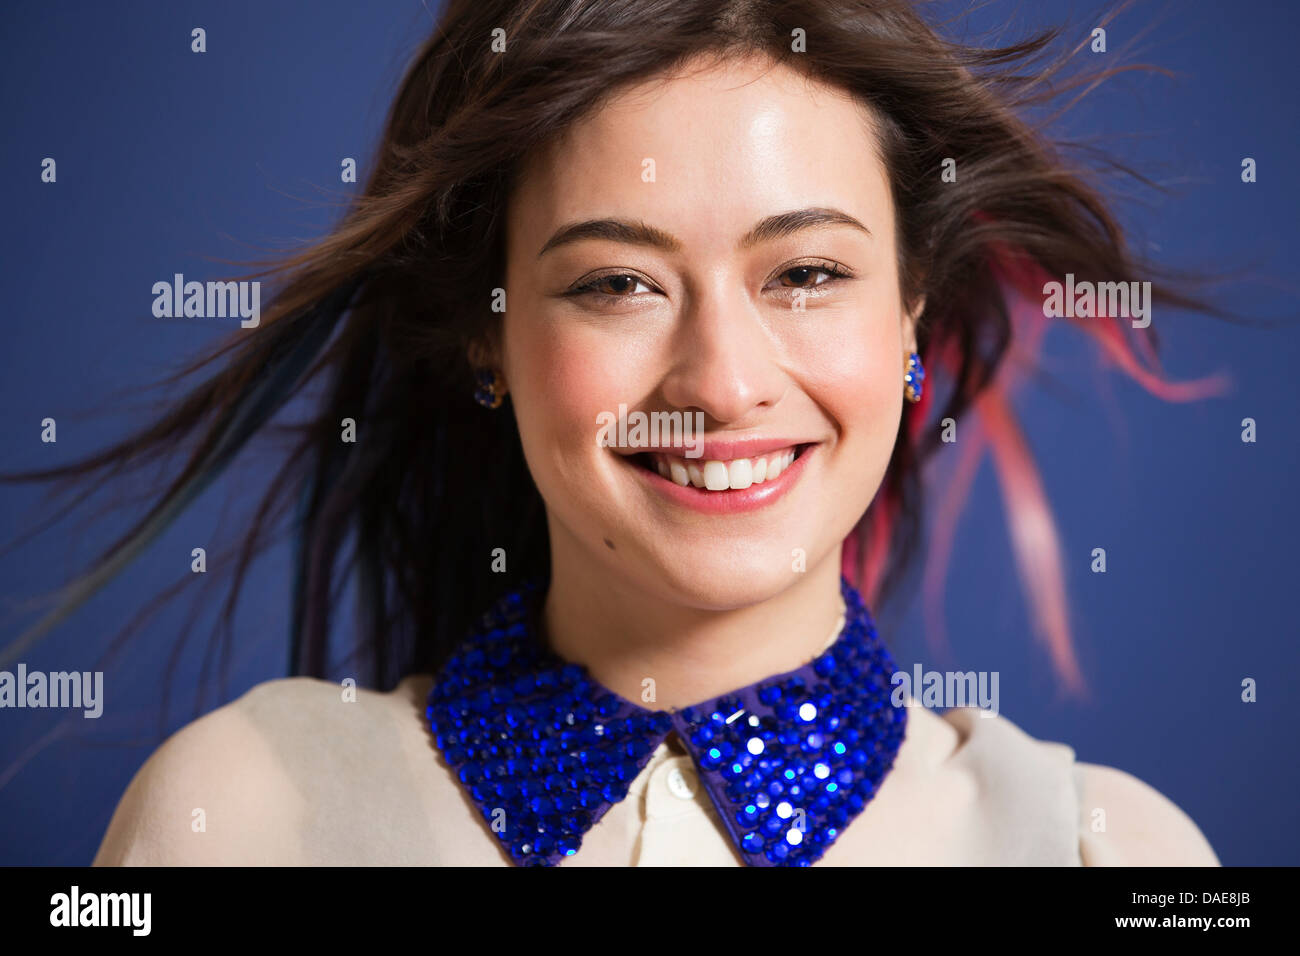 Portrait of young woman with dyed hair and blue sequin collar Stock Photo